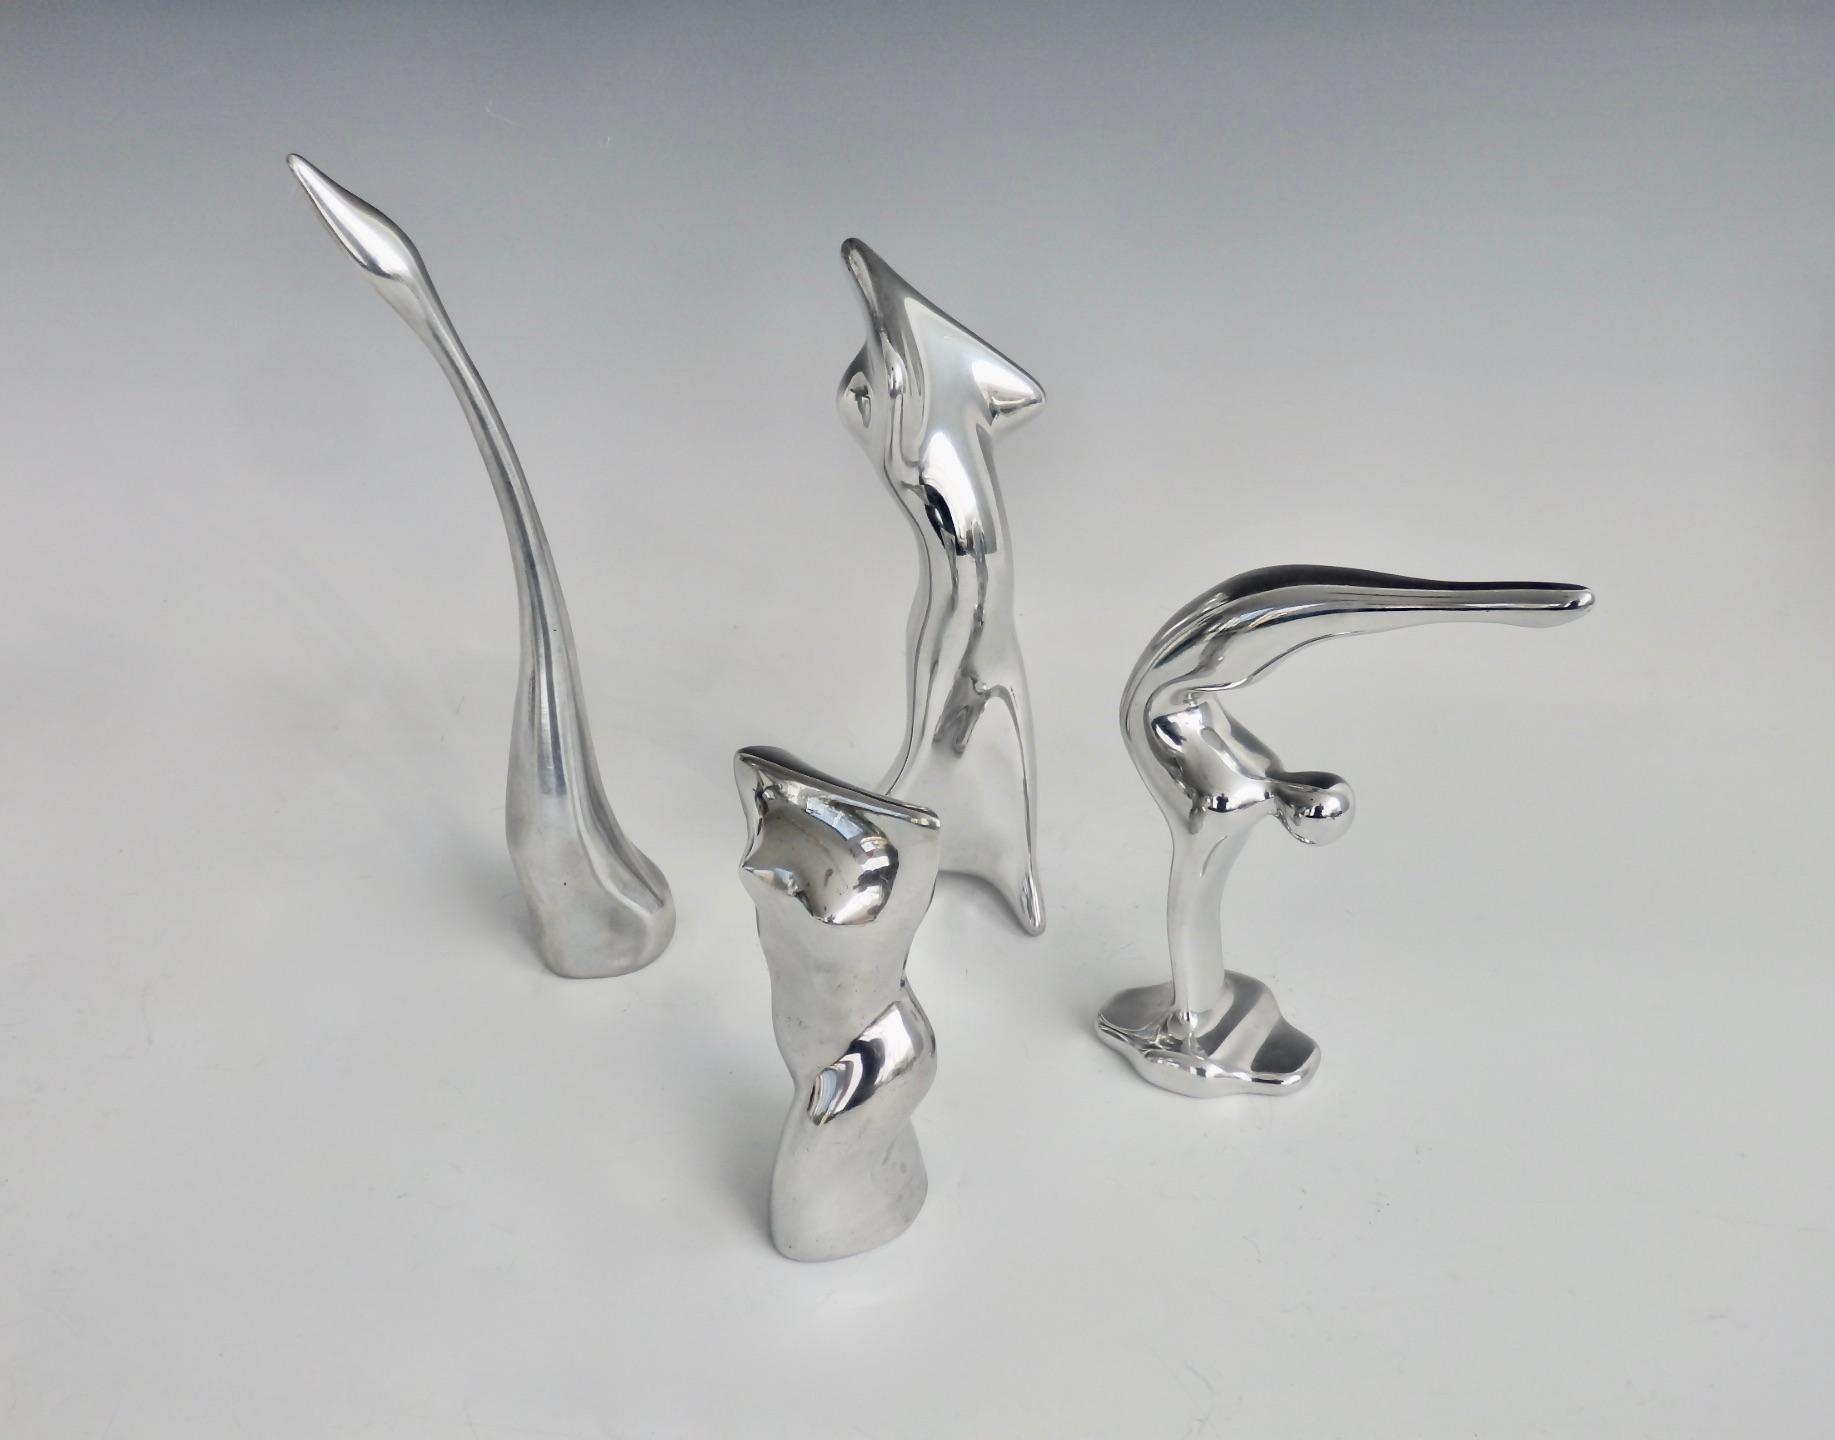 Mid-Century Modern Four Piece Collection of Polished Aluminum Stylized Figures by Hoselton